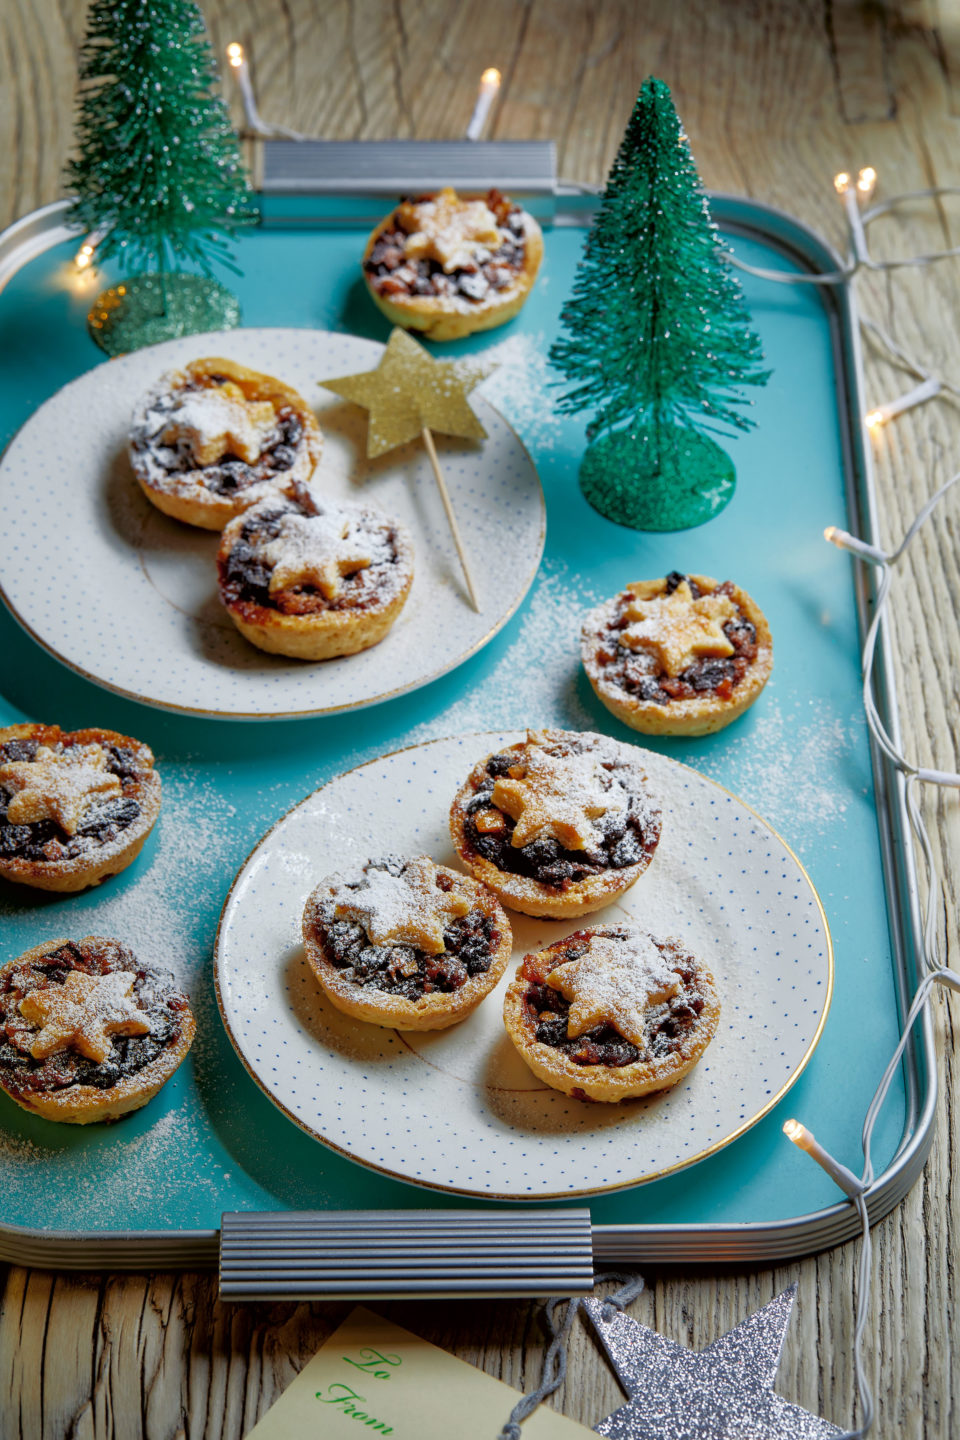 Fearne Cotton's Mince Pies